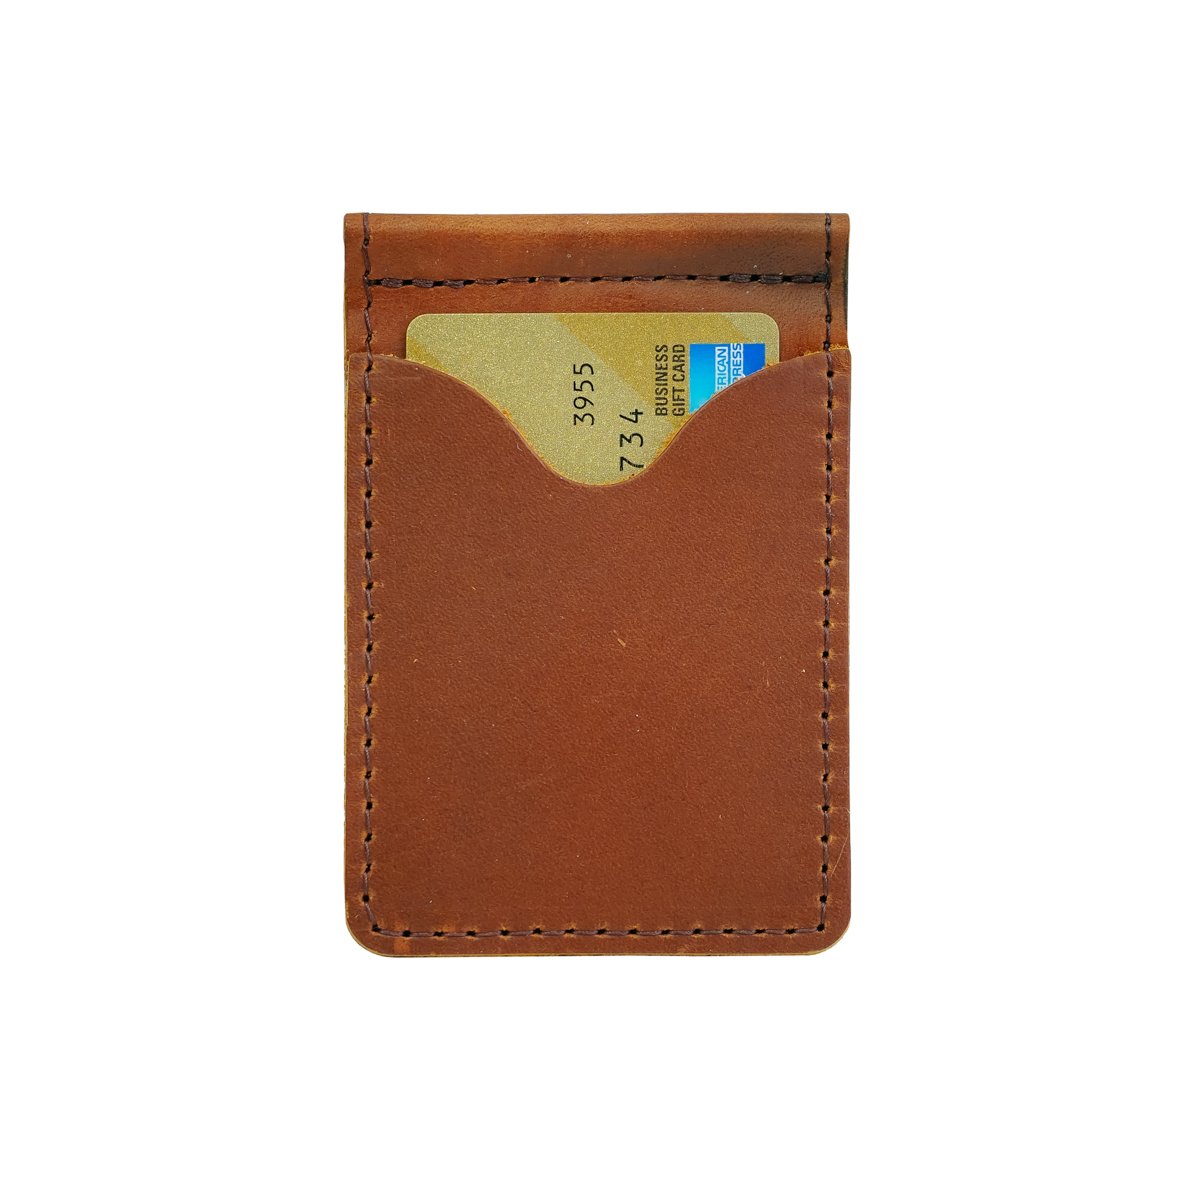 Brown Money Clip Wallet. Handmade of High quality Italian leather!